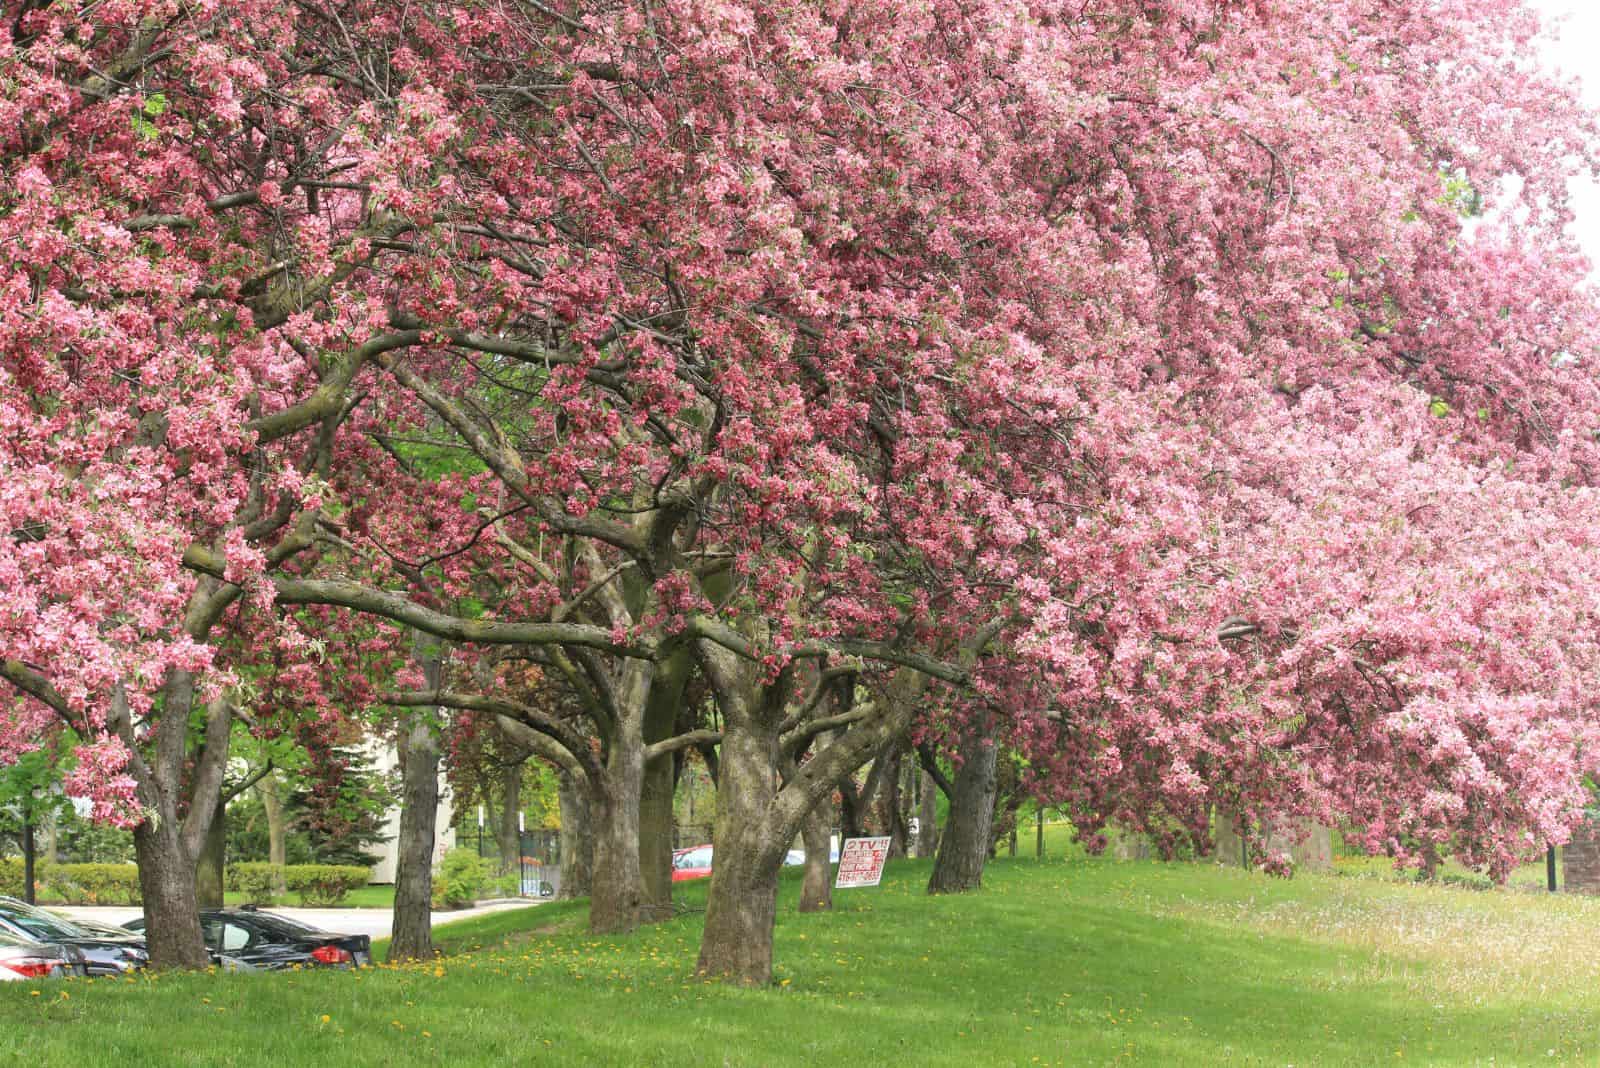 A Complete List Of The Pros And Cons Of Redbud Trees